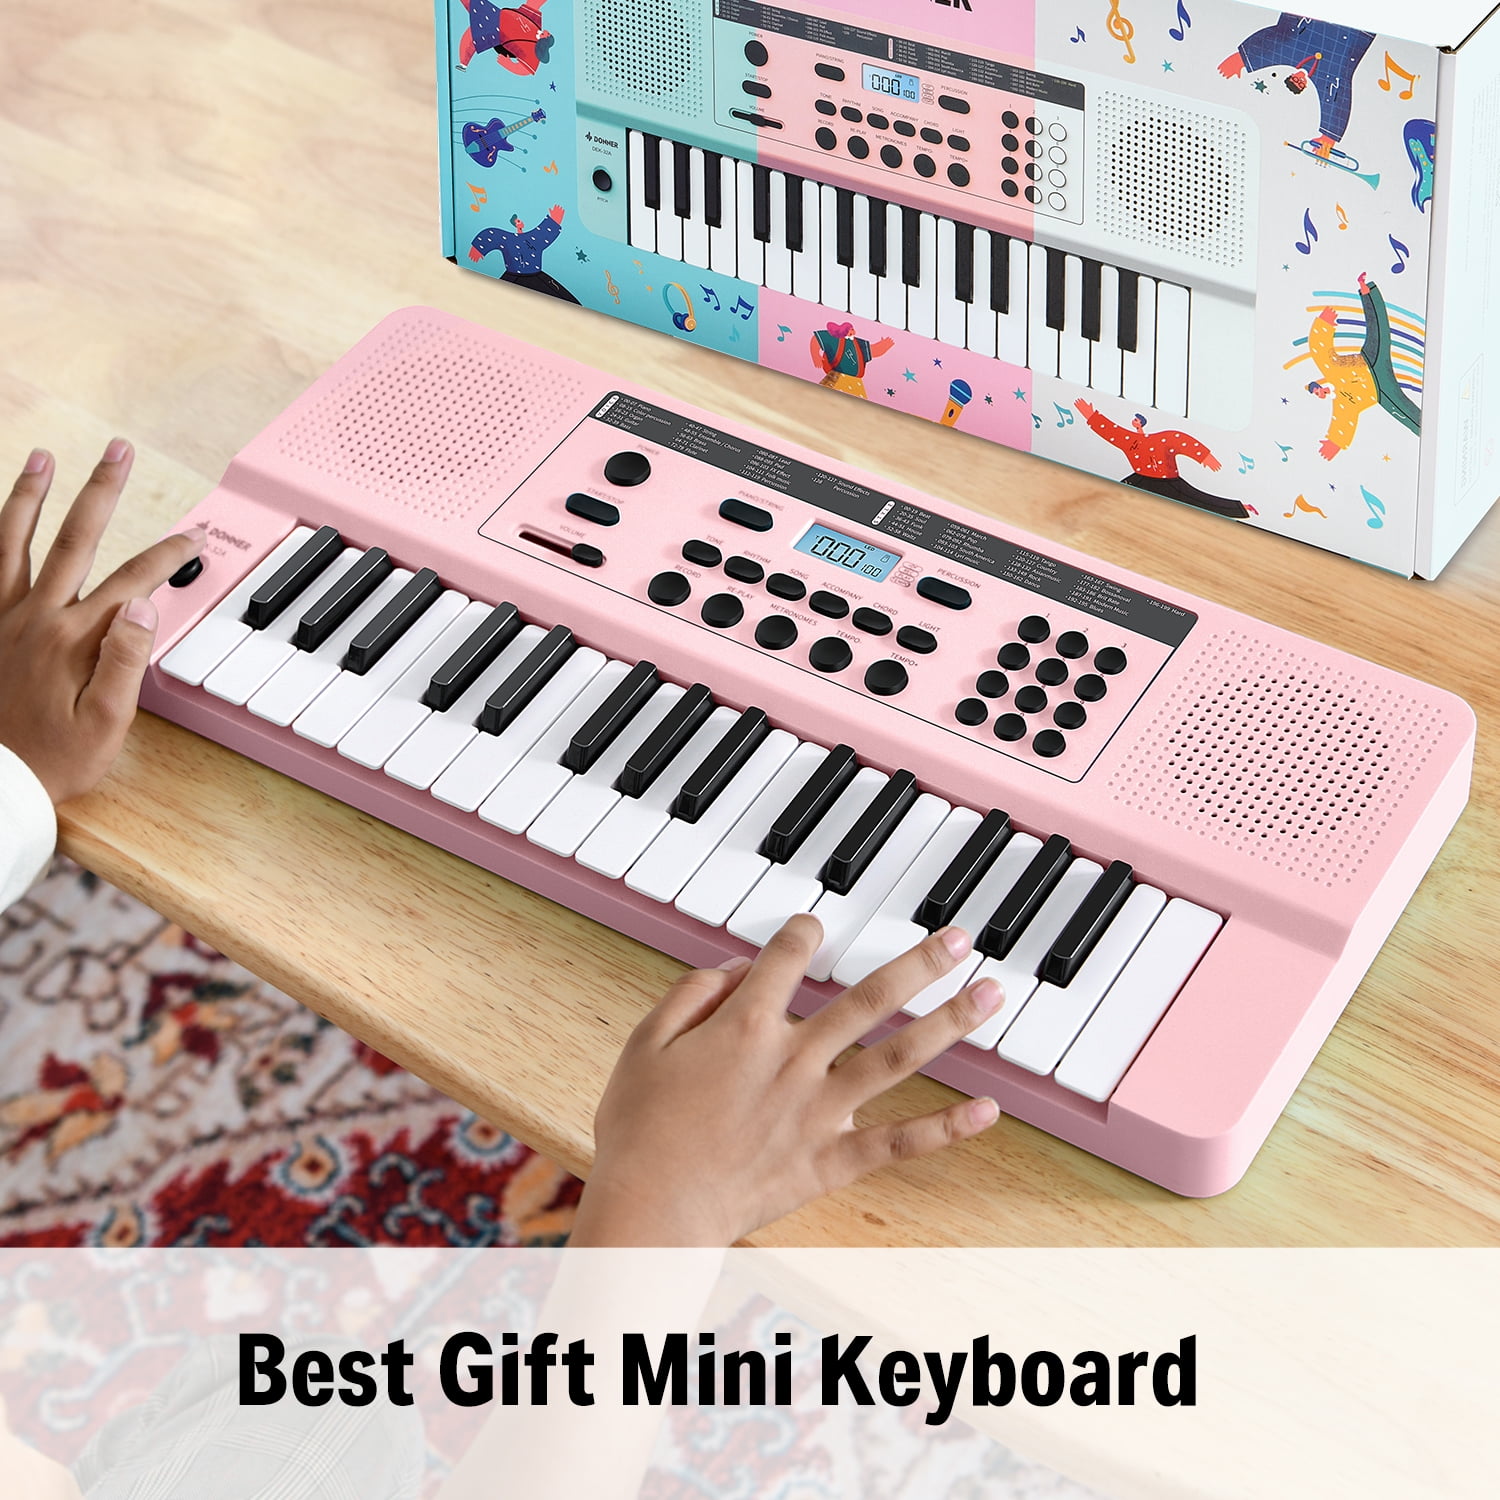 Donner 32 Key Electronic Keyboard Piano, Fun Gift for Birthday& Christmas  for Beginners, Kids Instrument with LED Light Keyboard Teaching Mode, Pink